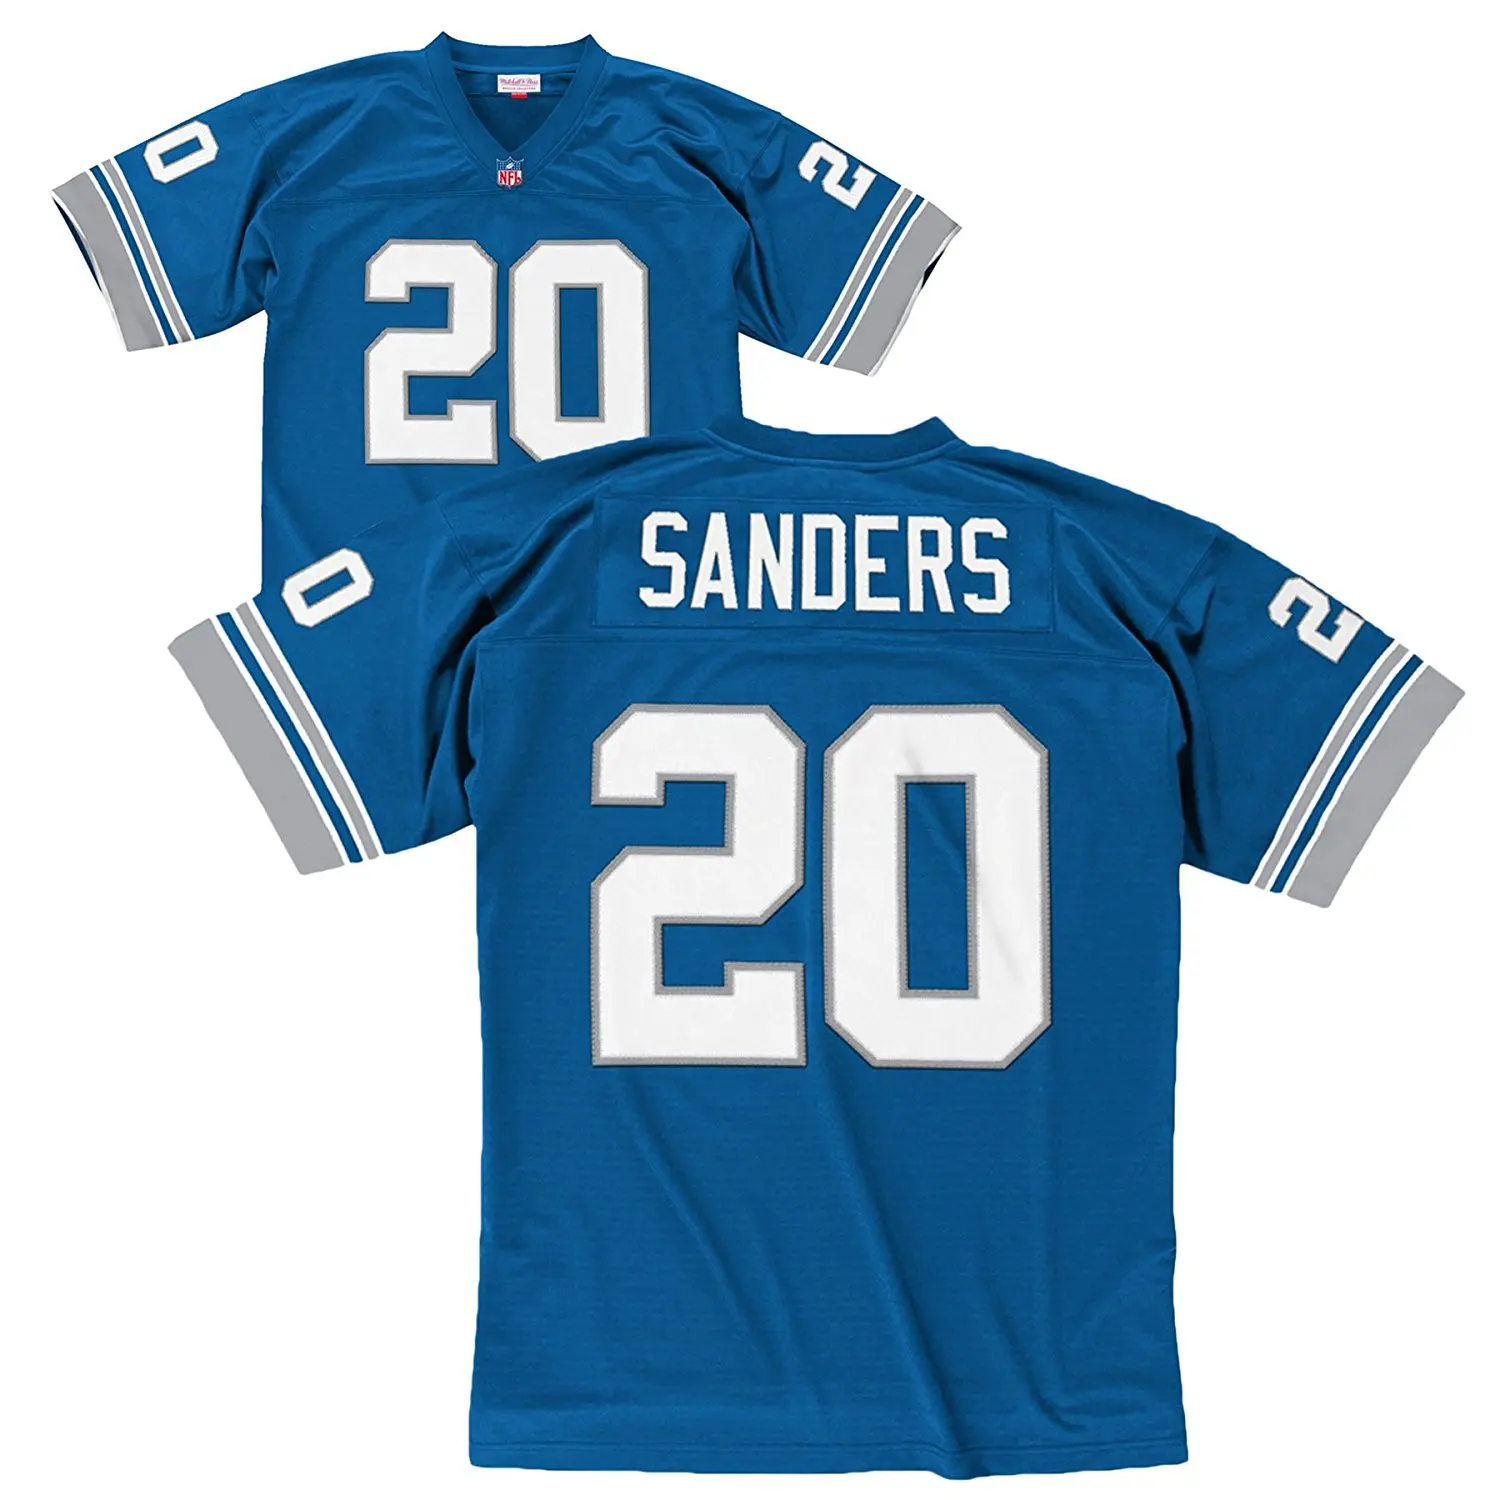 lions throwback jersey